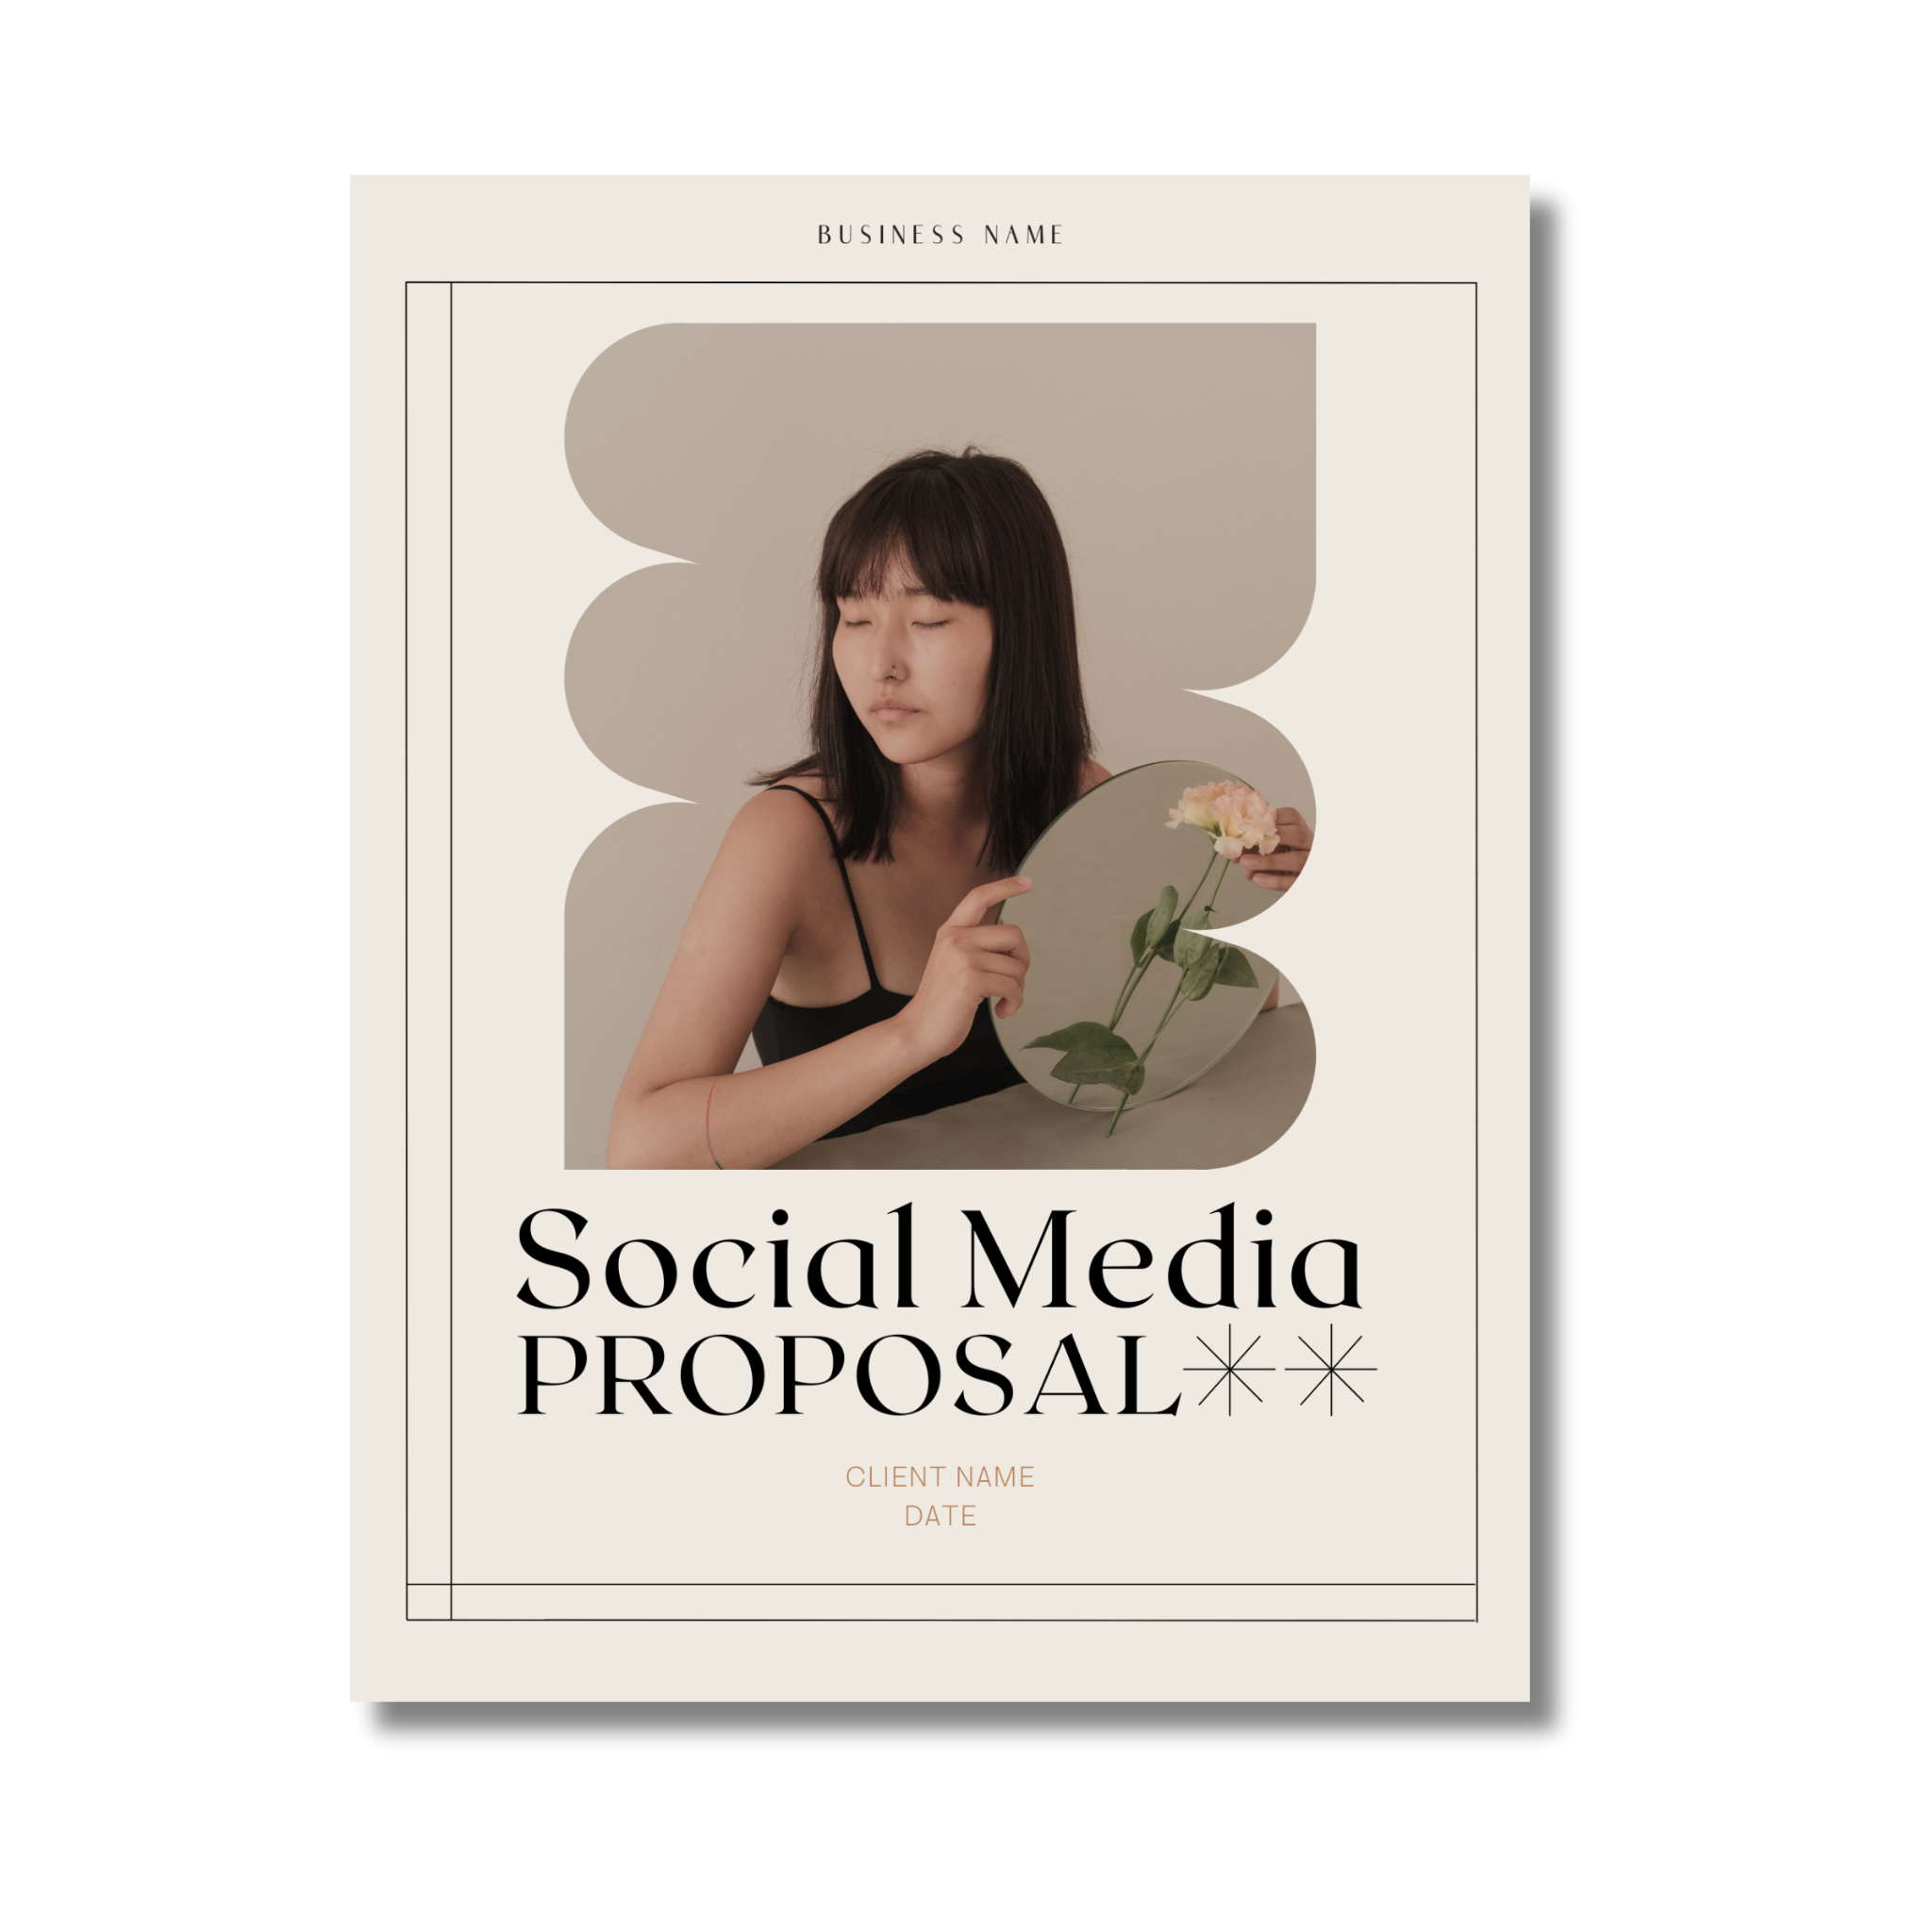 Social Media Proposal Template - Down to Earth